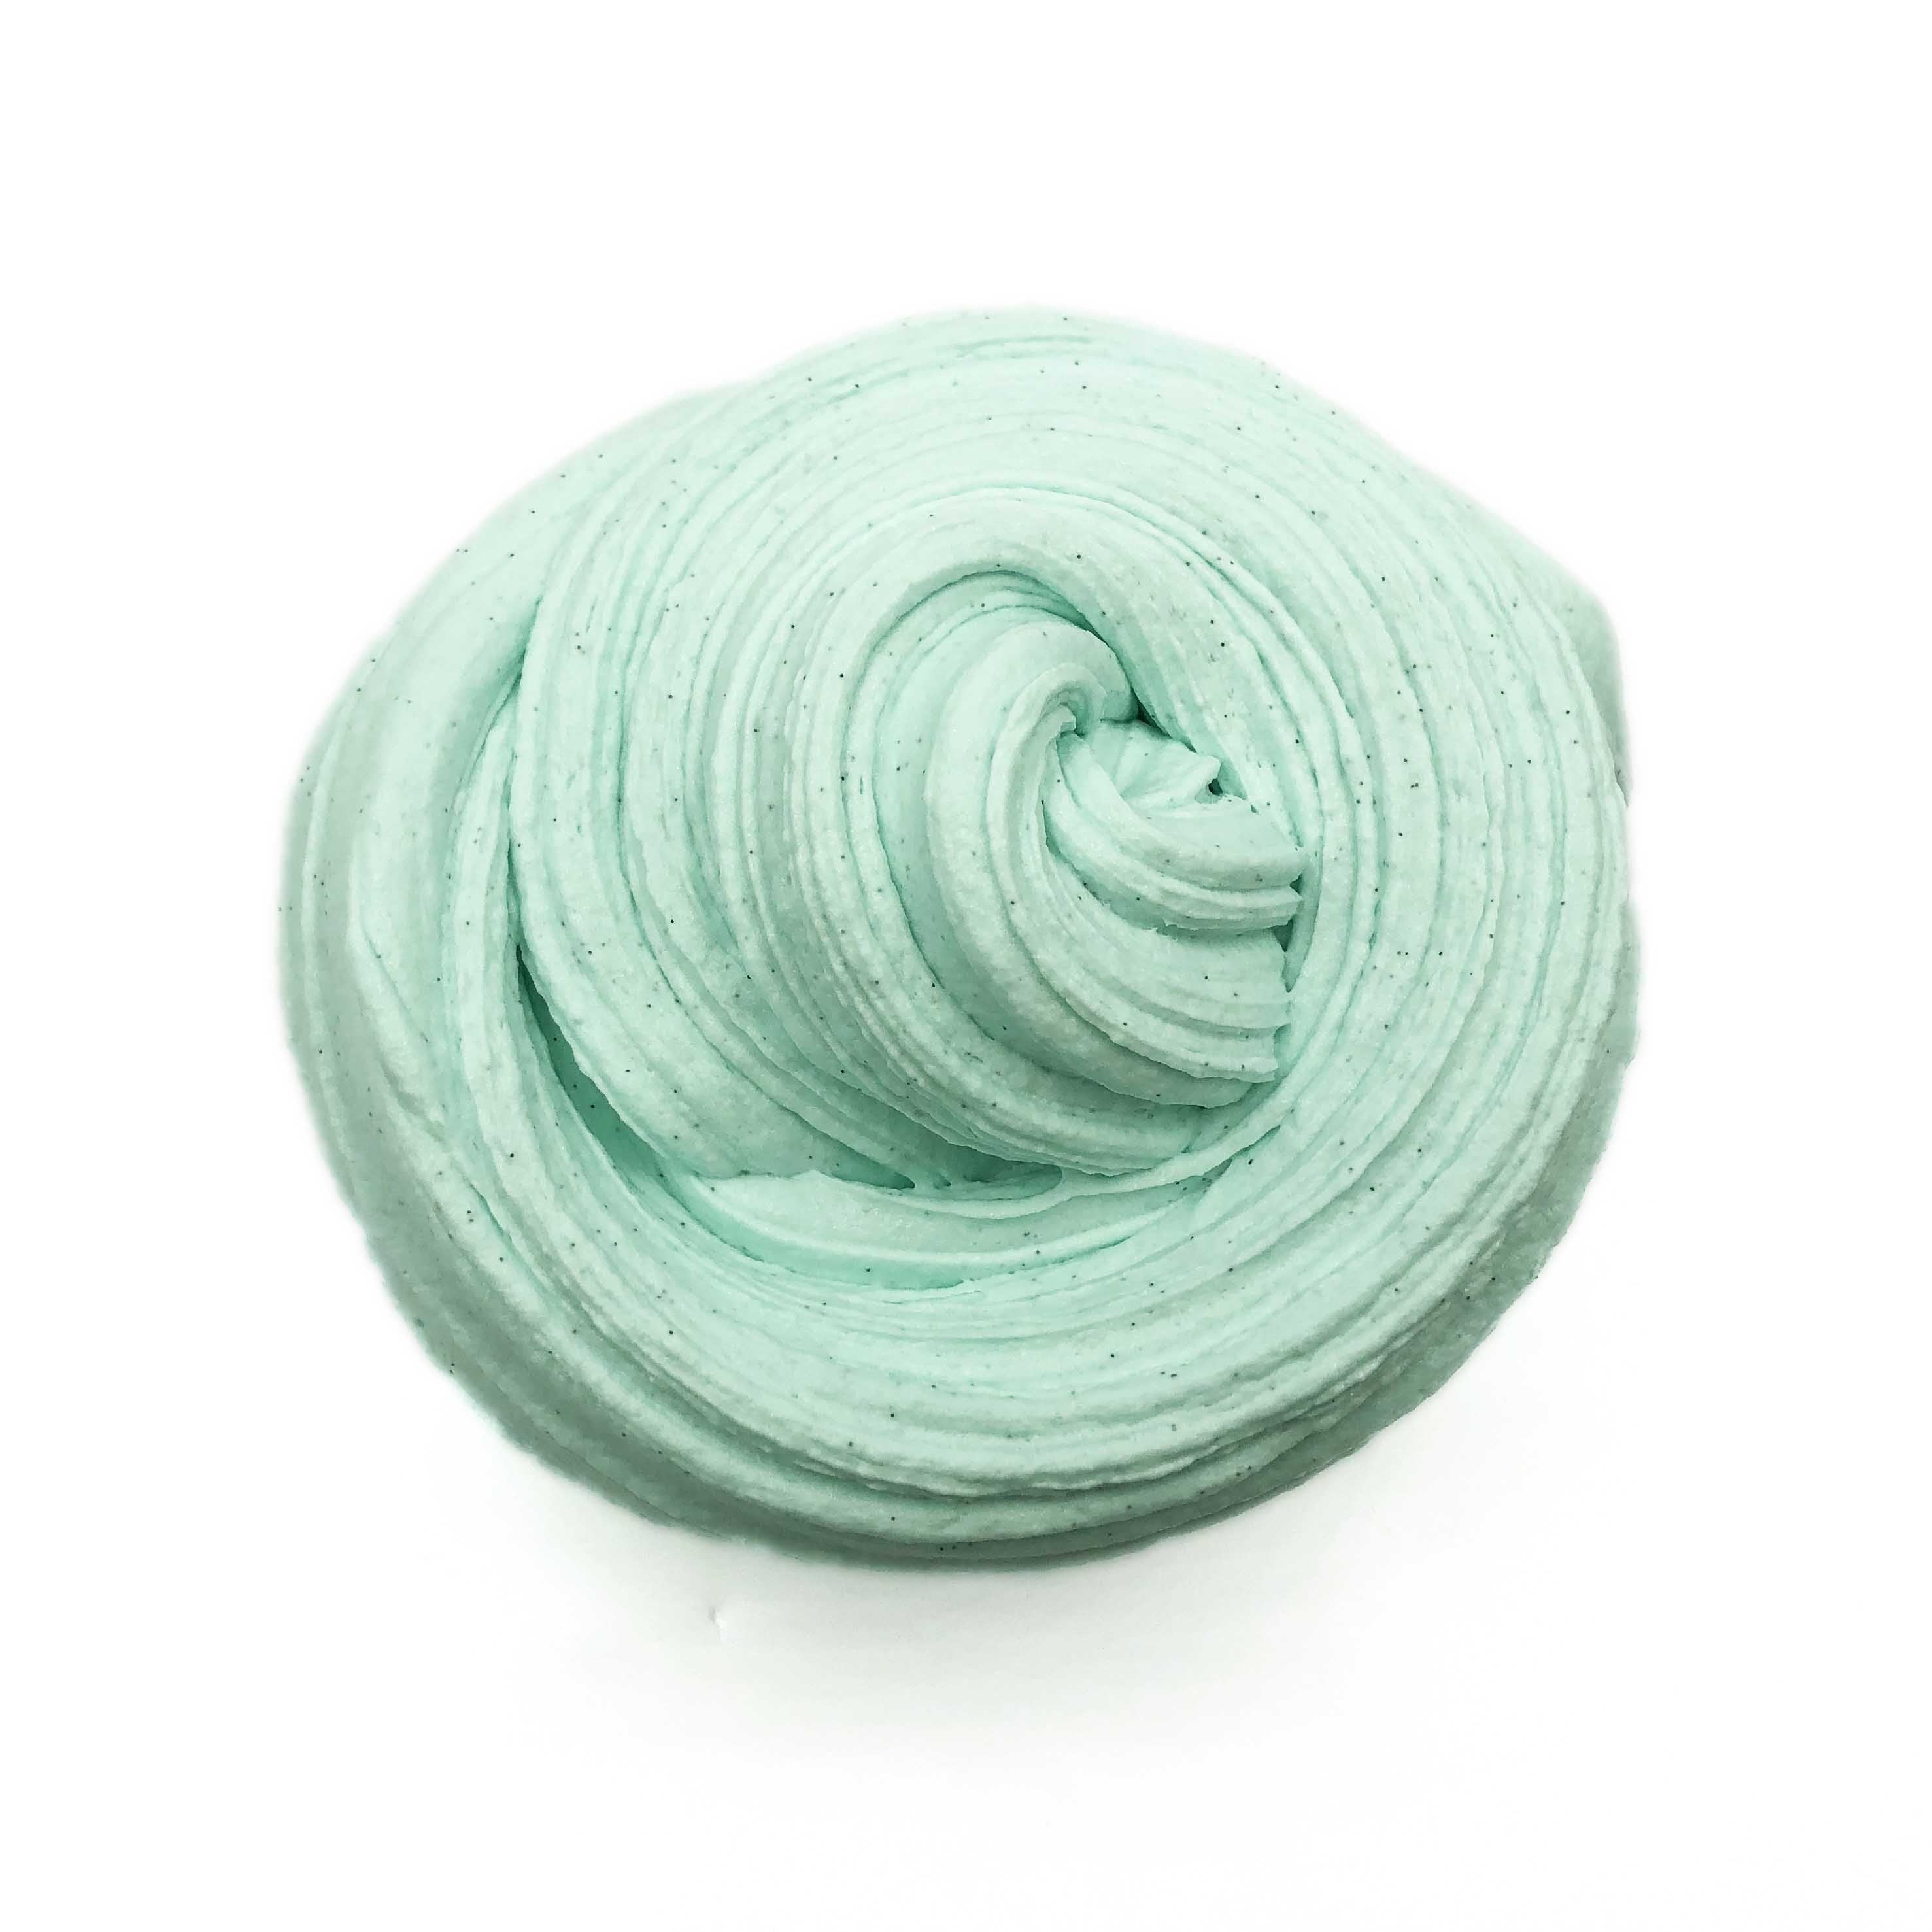 Mint Oreo Ice Cream Green Butter Slime Swirl Top View